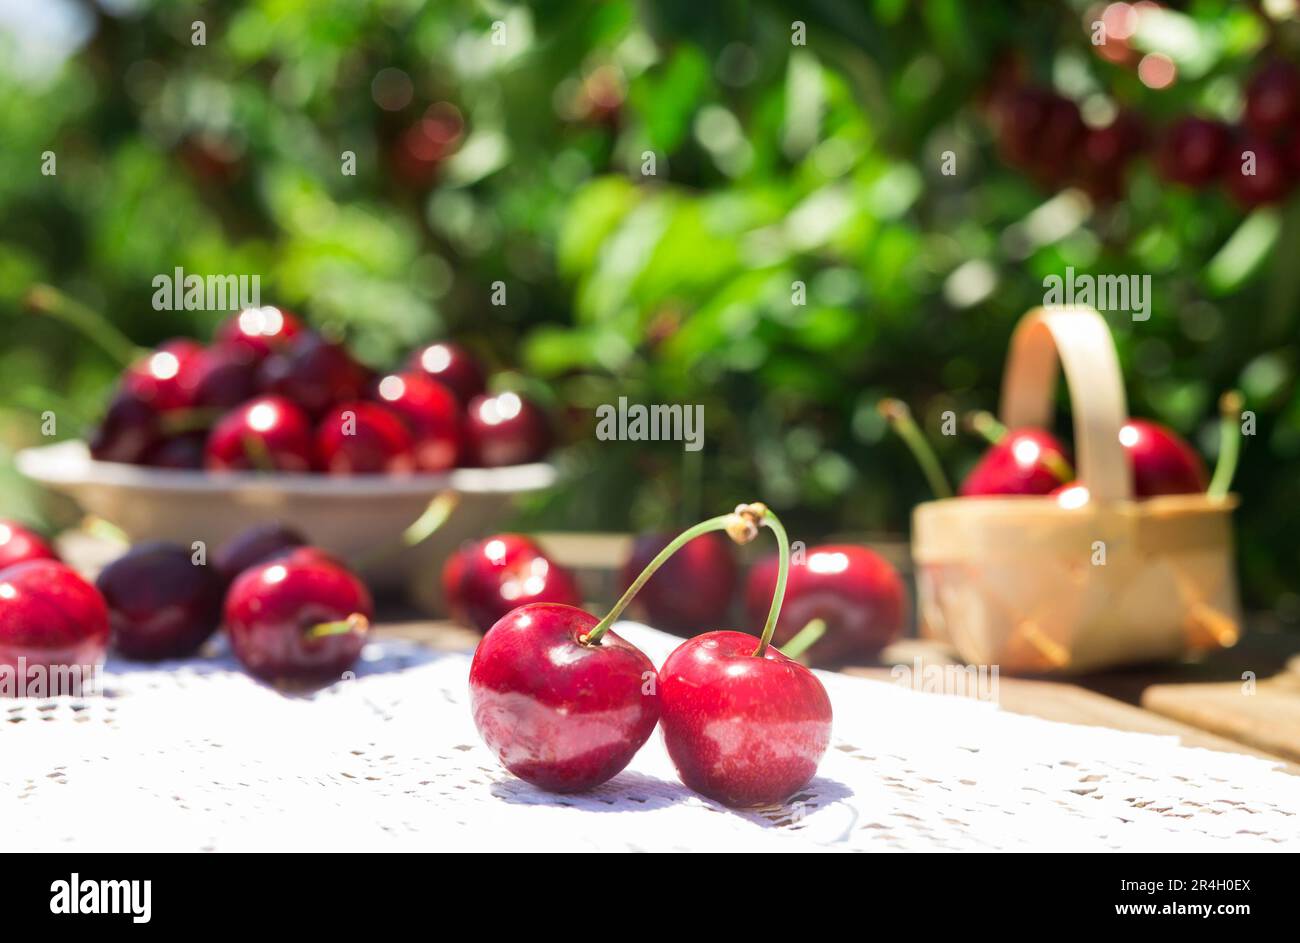 ripe juicy cherries on the table in the garden  Stock Photo